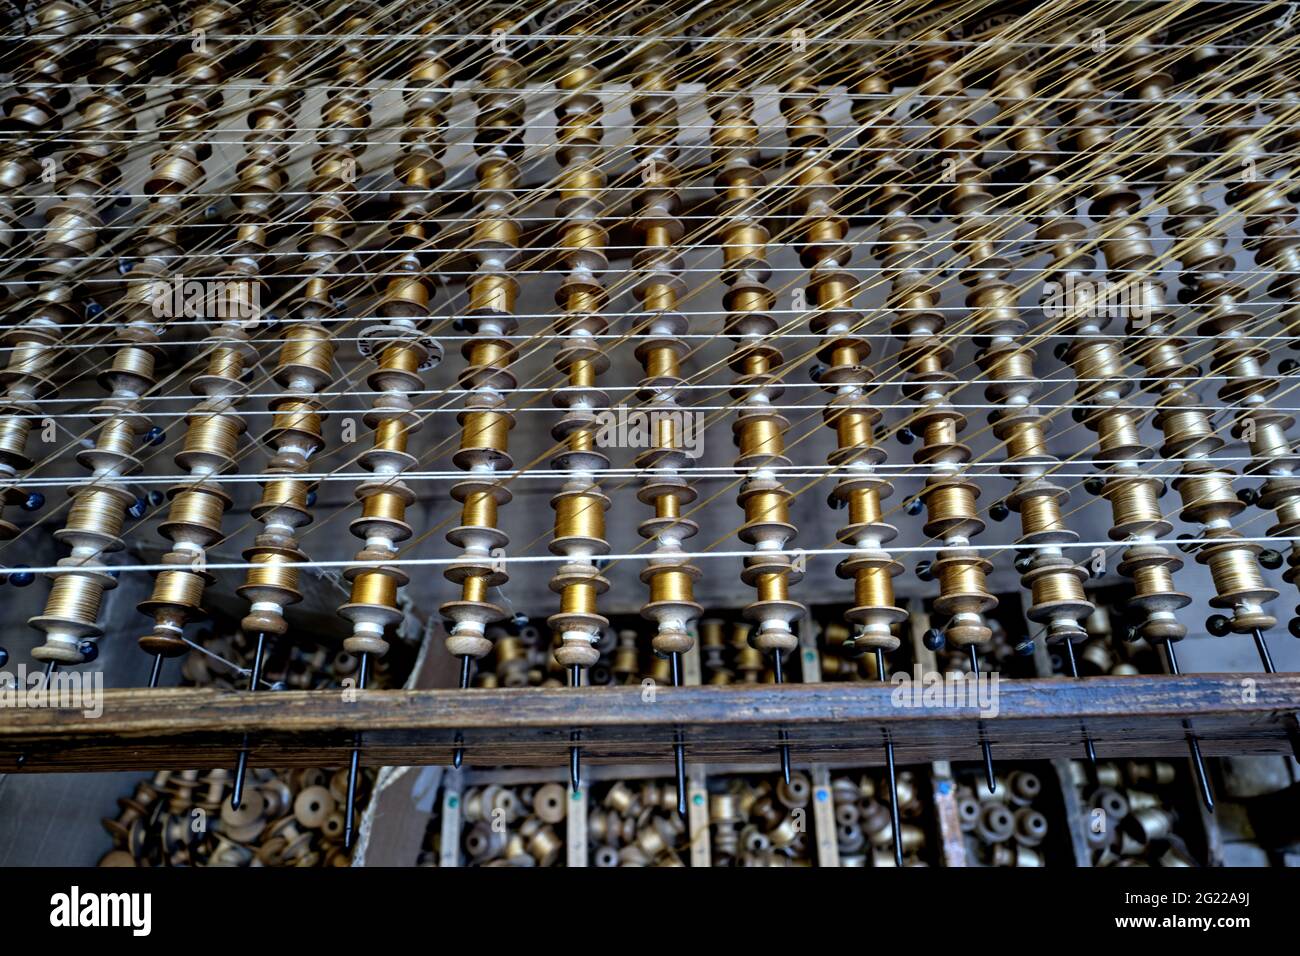 Golden thread fuzes on a traditional wooden looms of the Bevilacqua weavers, produce luxury textile in Venice since 1875. Stock Photo